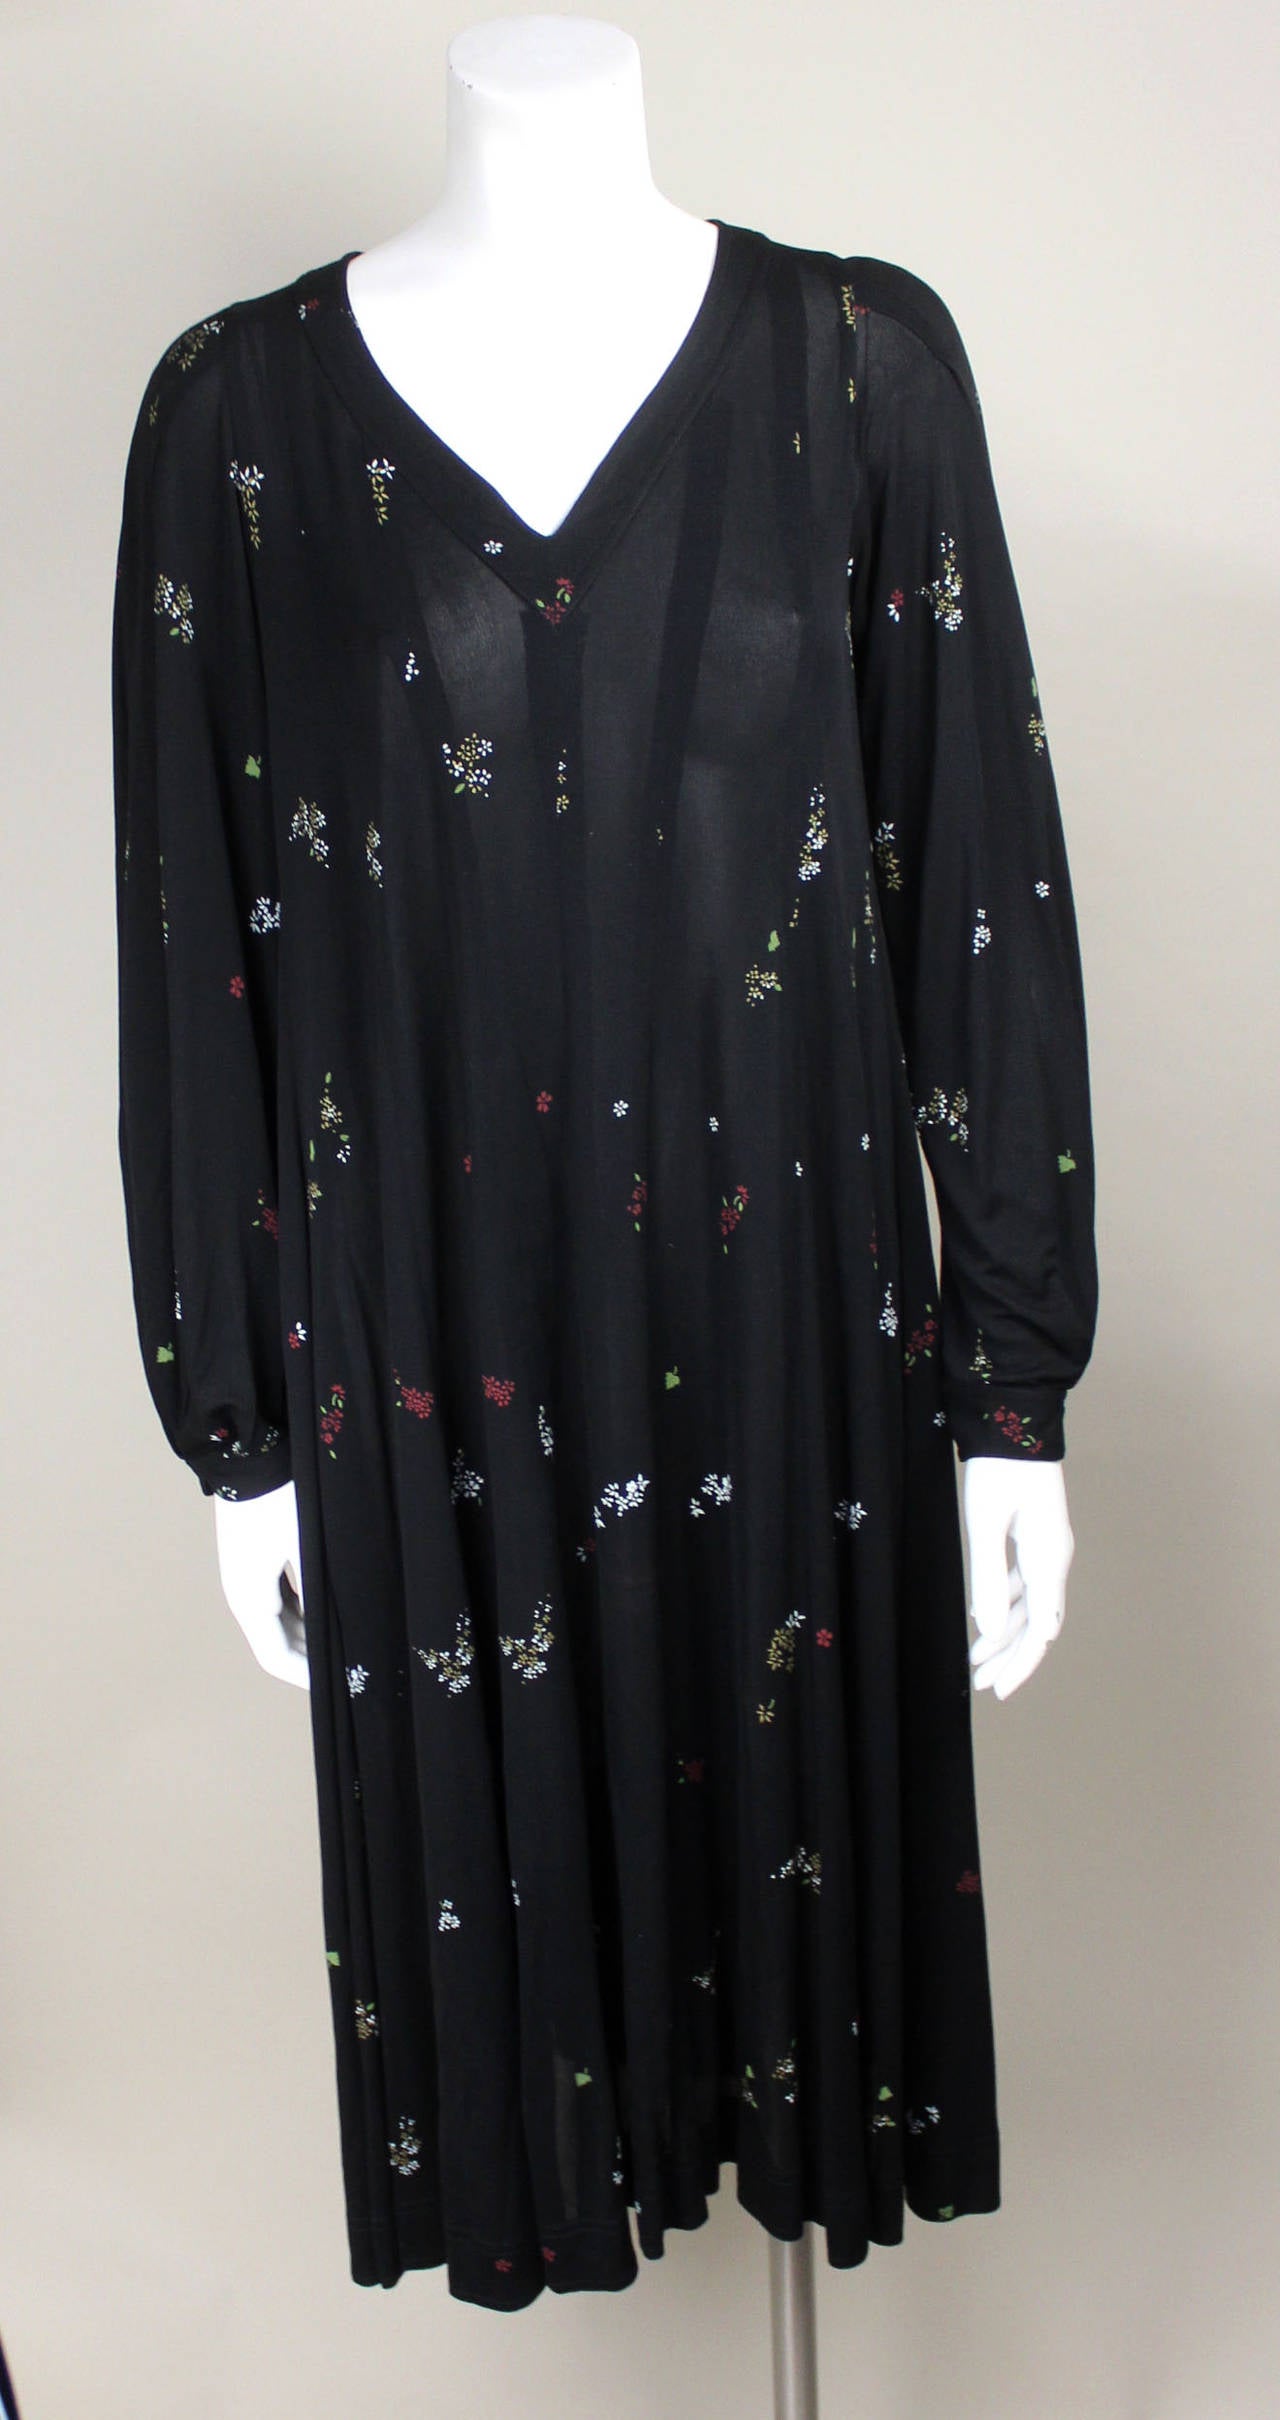 Jean Muir late 1970s Sheer Rayon Folkloric Inspired Dress In Excellent Condition For Sale In New York, NY